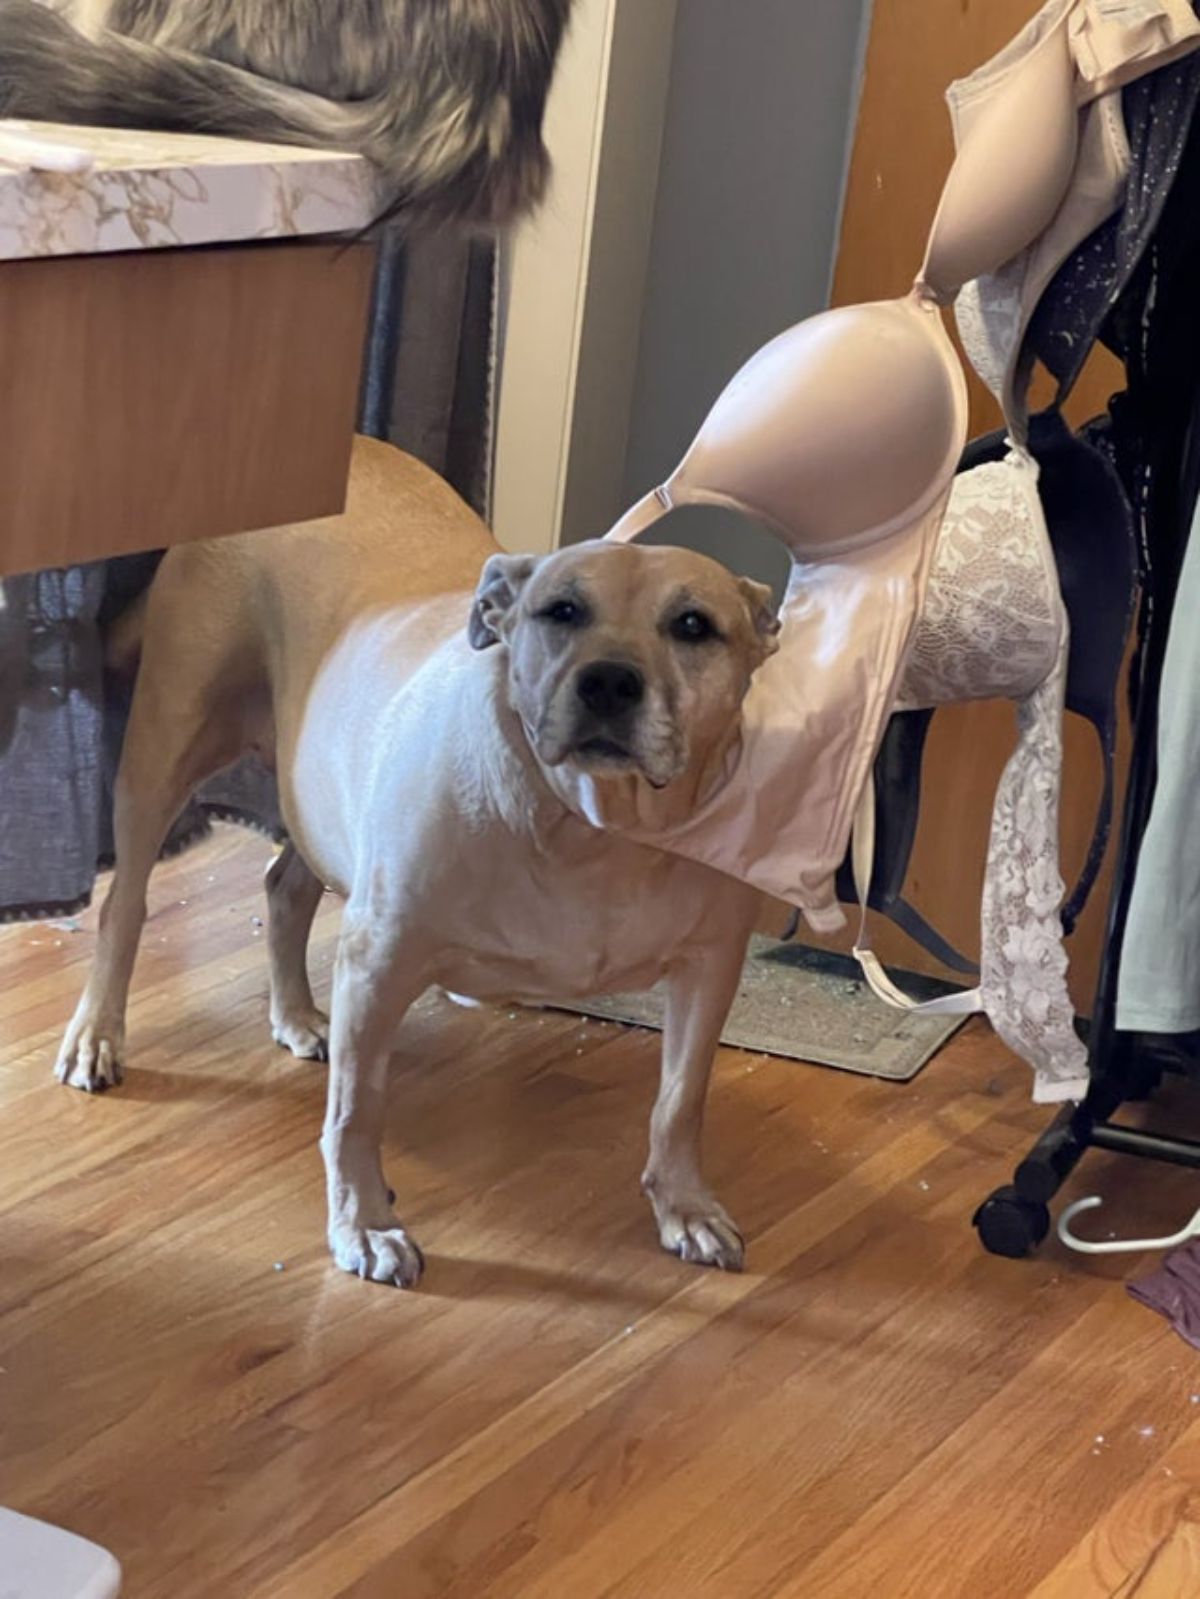 brown dog standing with the strap of a pink bra around its neck